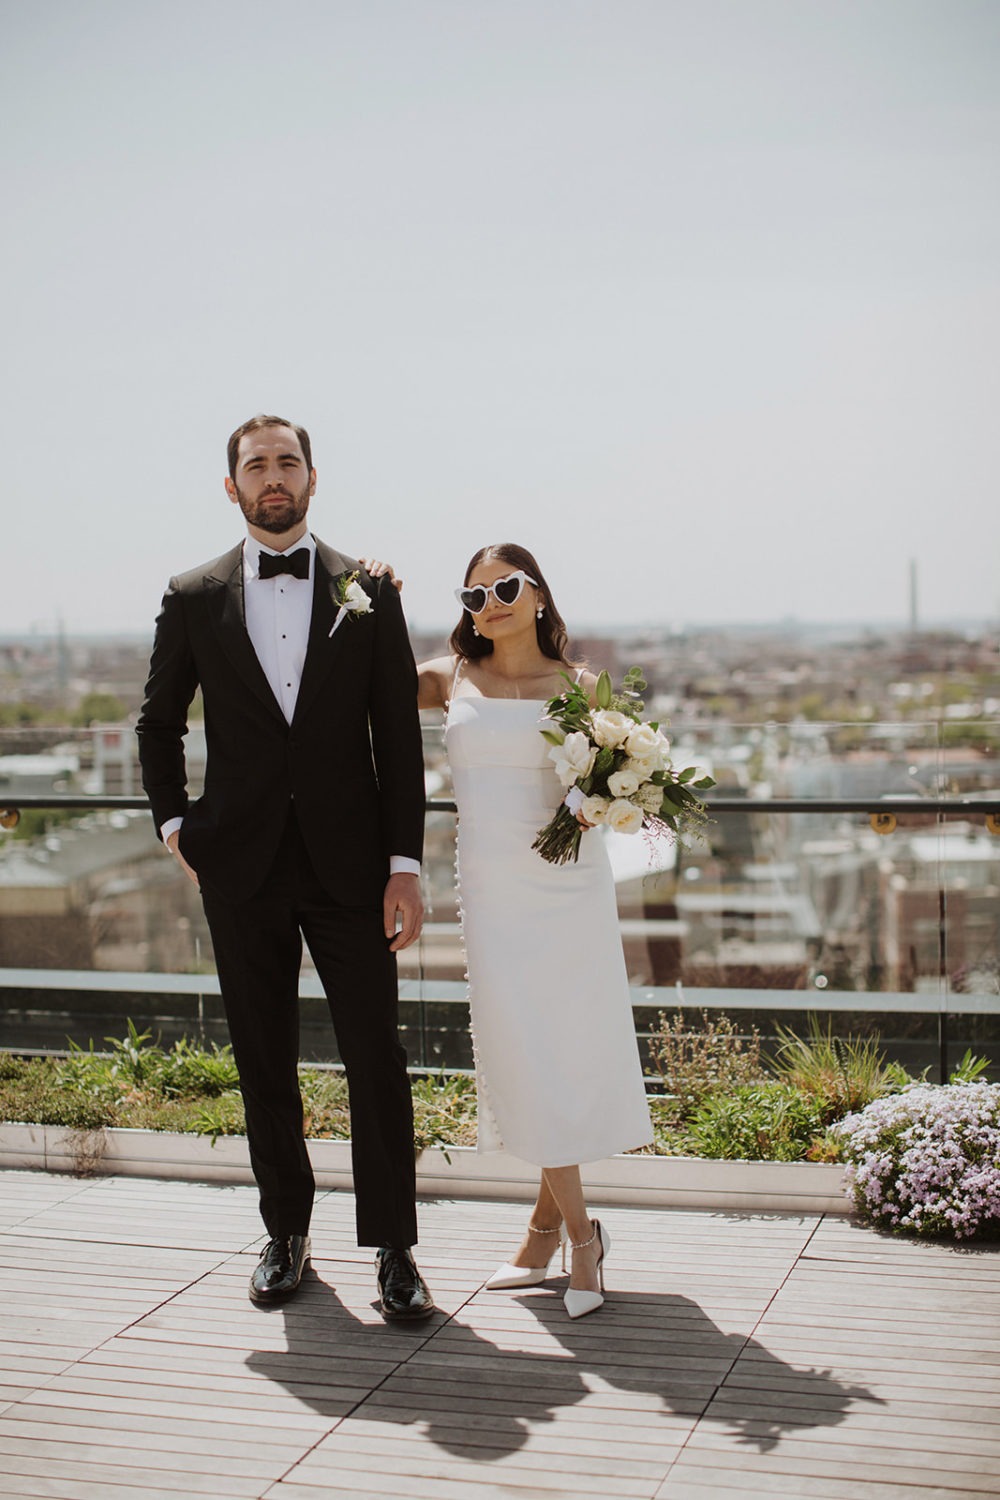 Couple poses with wedding bouquet and sunglasses at DC rooftop elopement